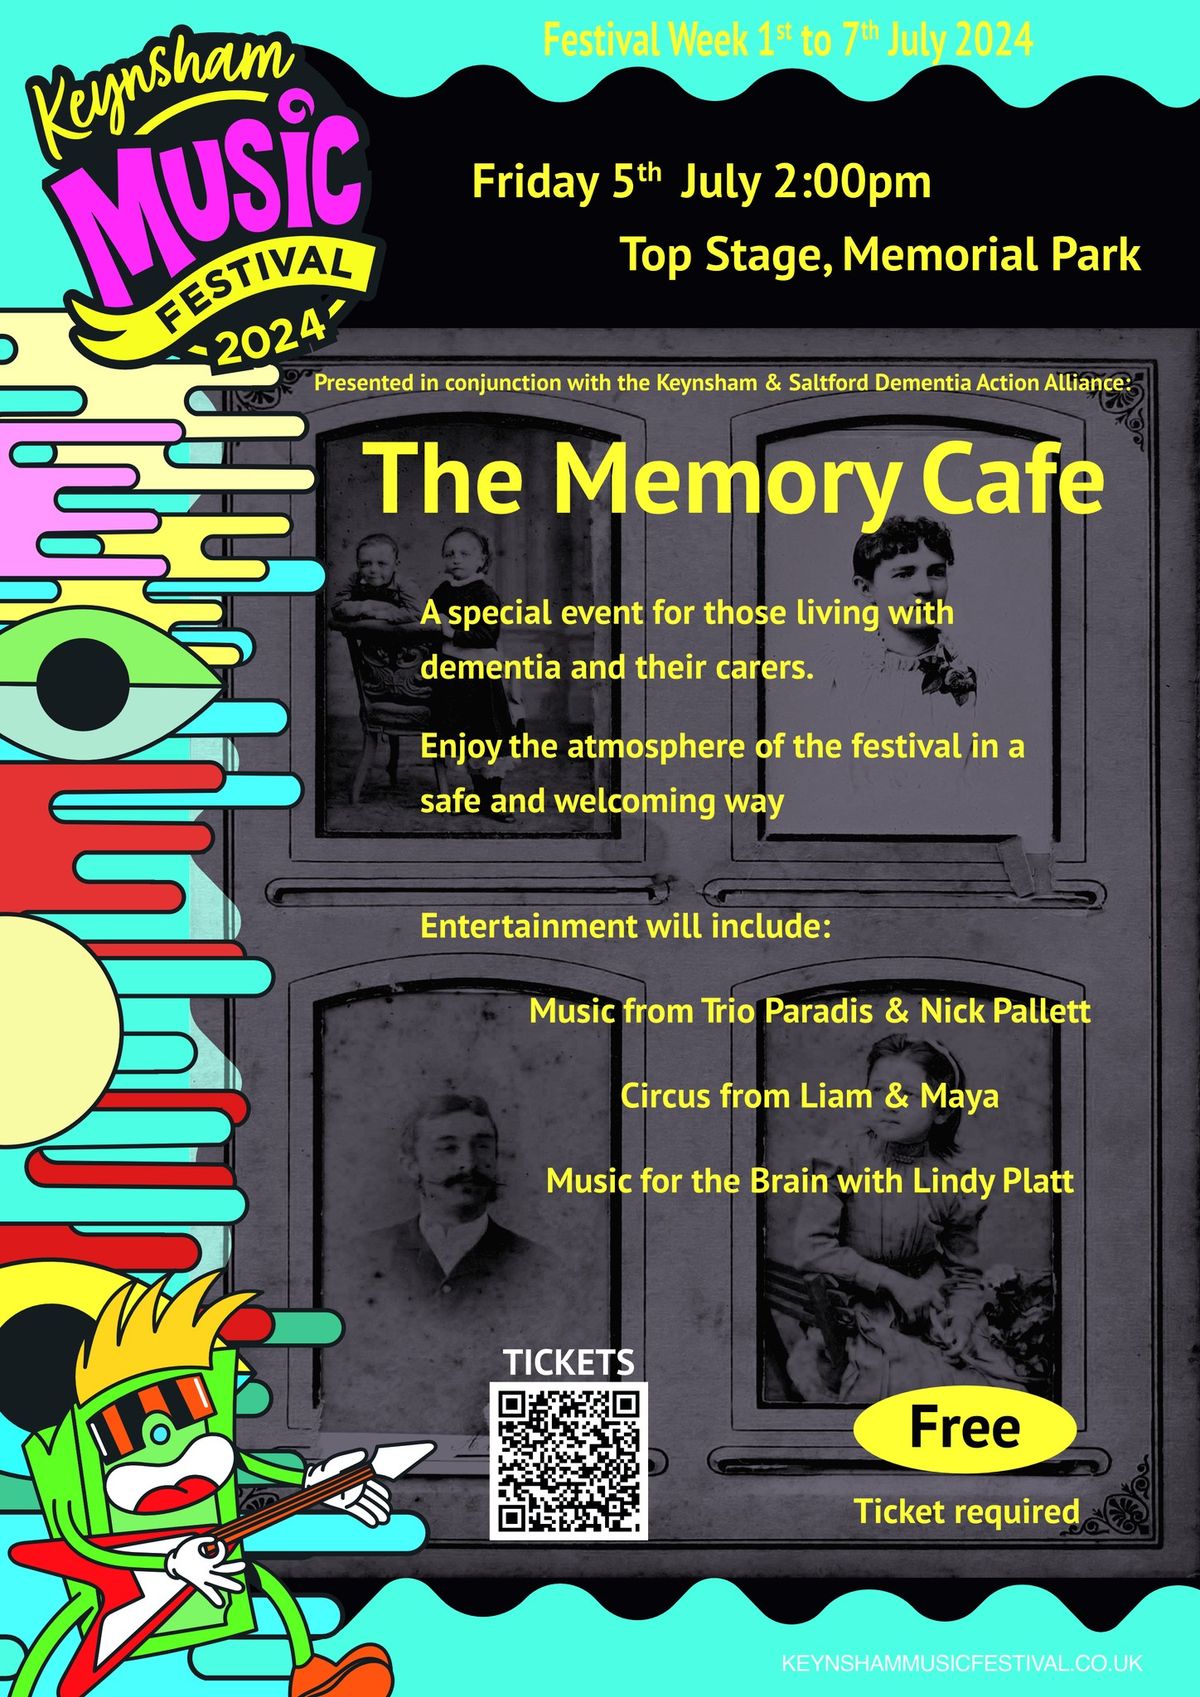 The Memory Cafe